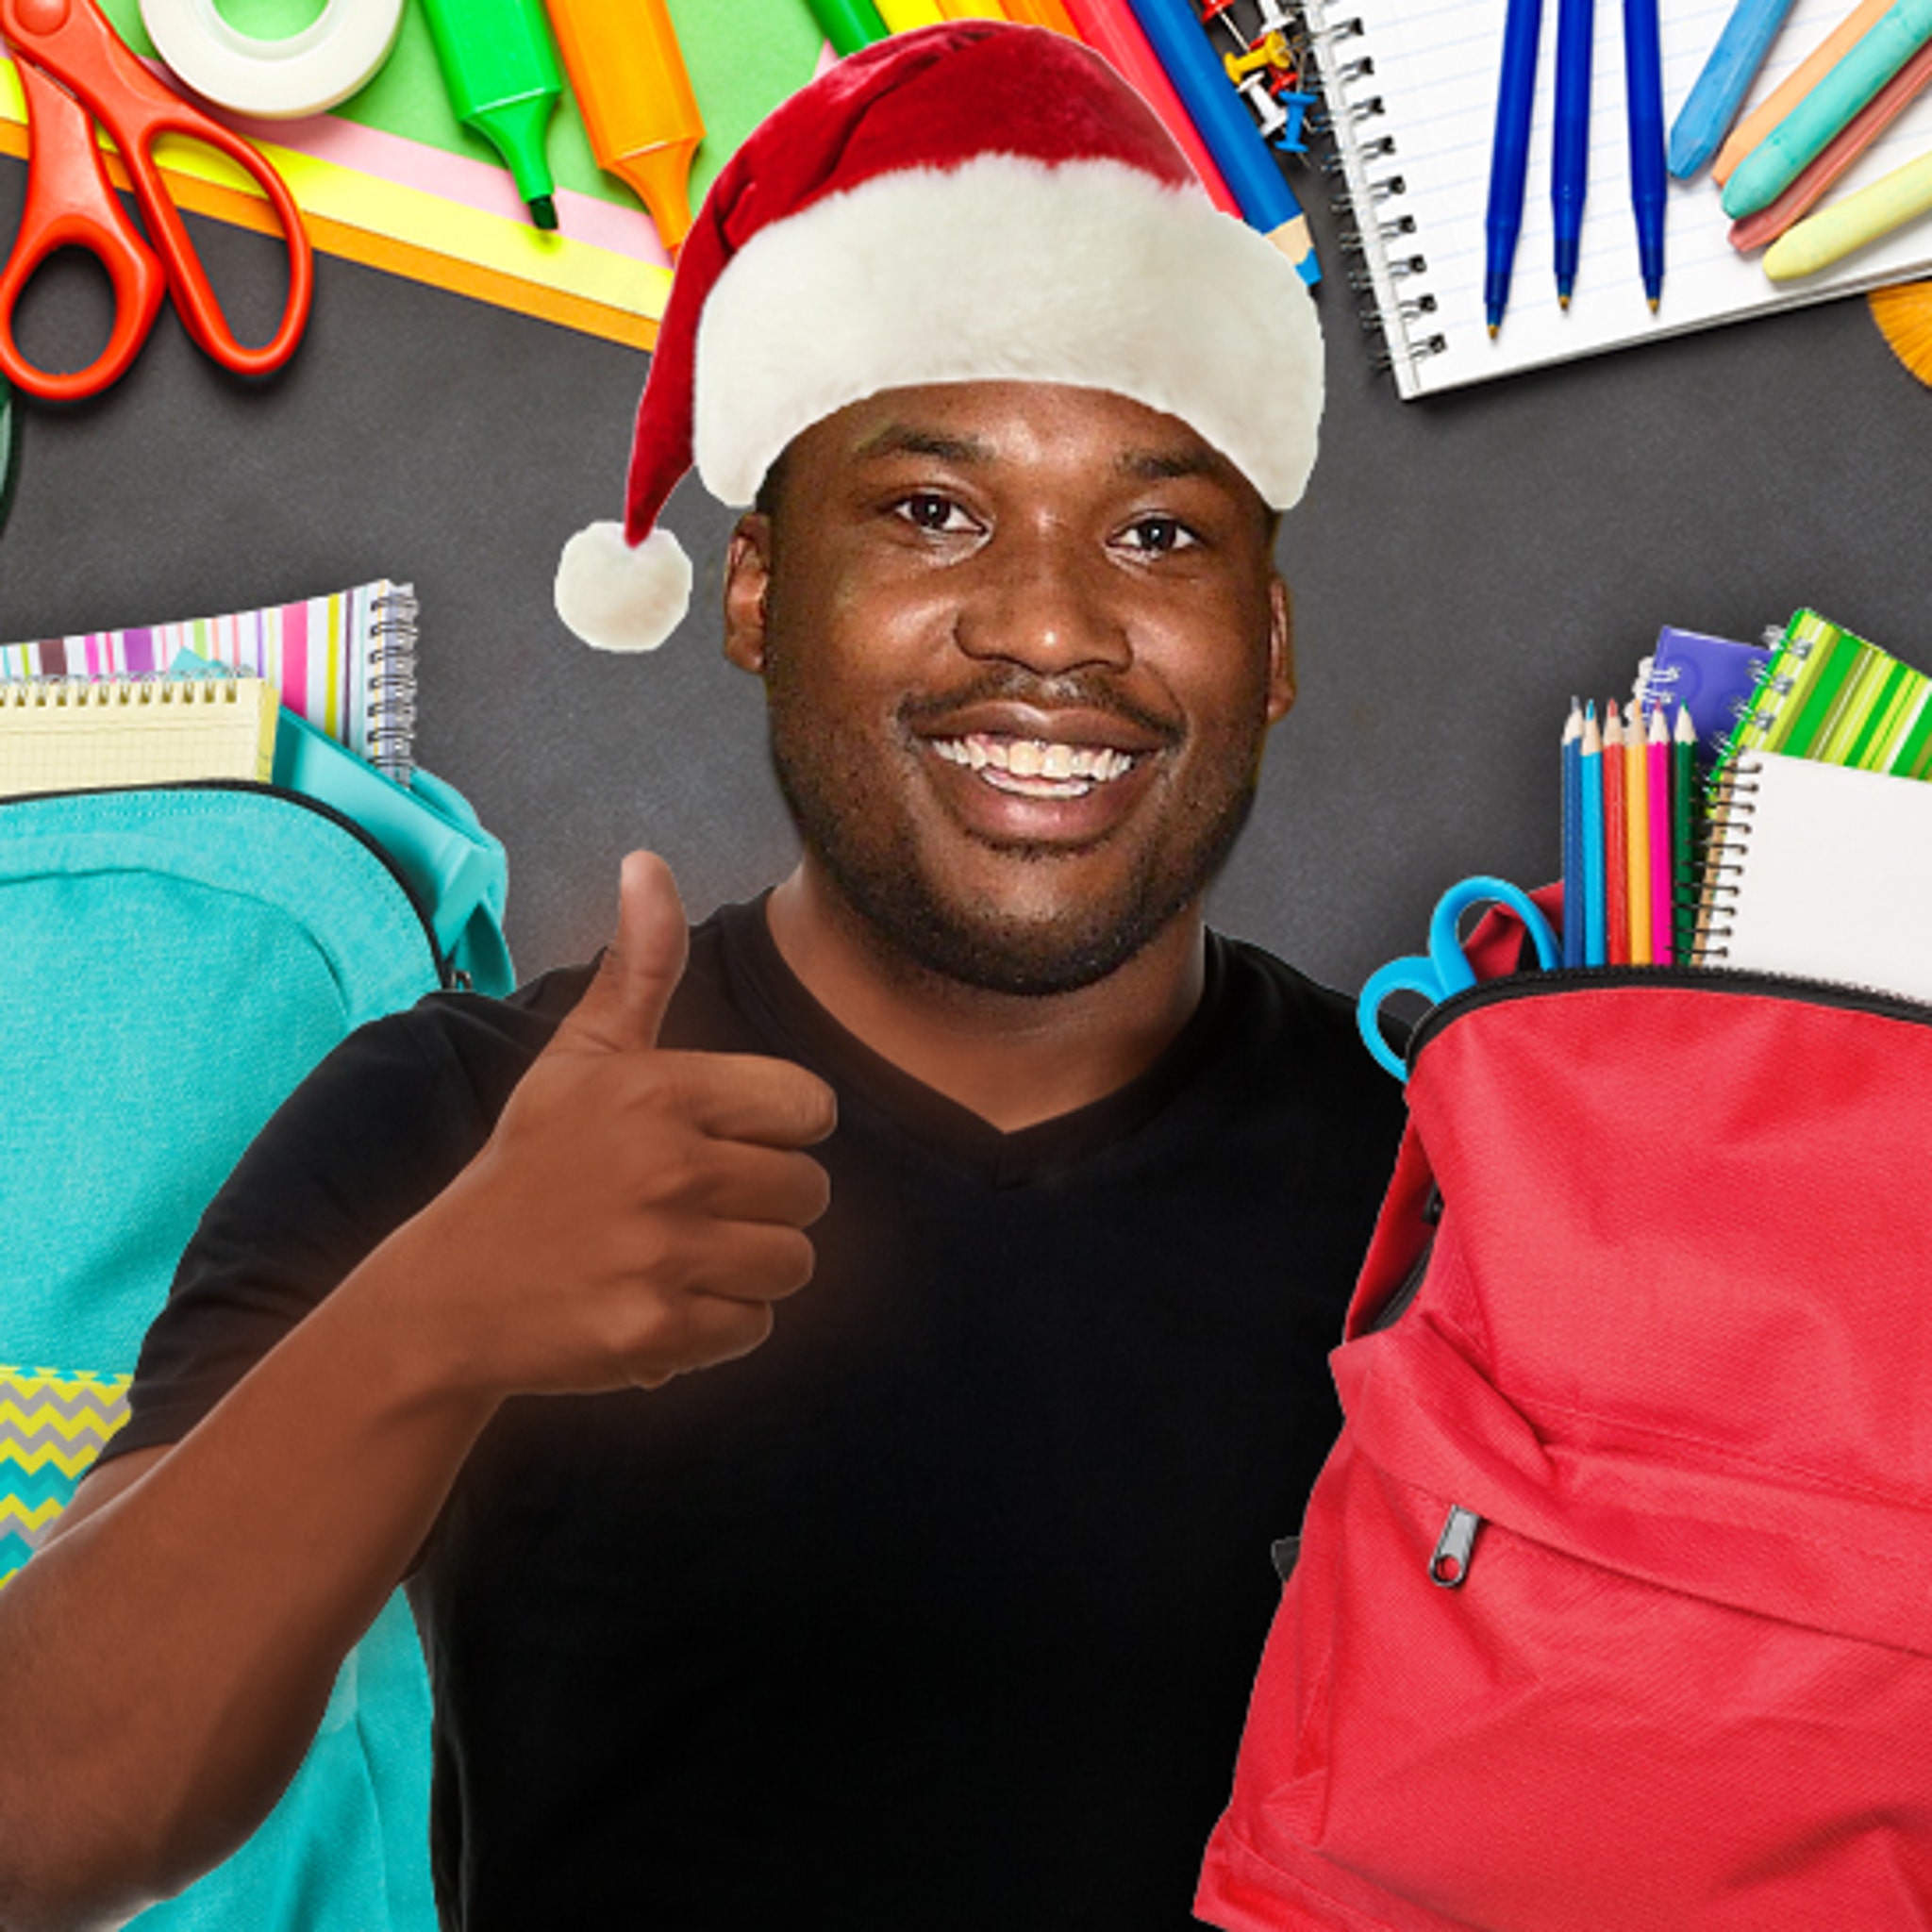 Meek Mill donates 6,000 backpacks to Philly school kids at his alma mater